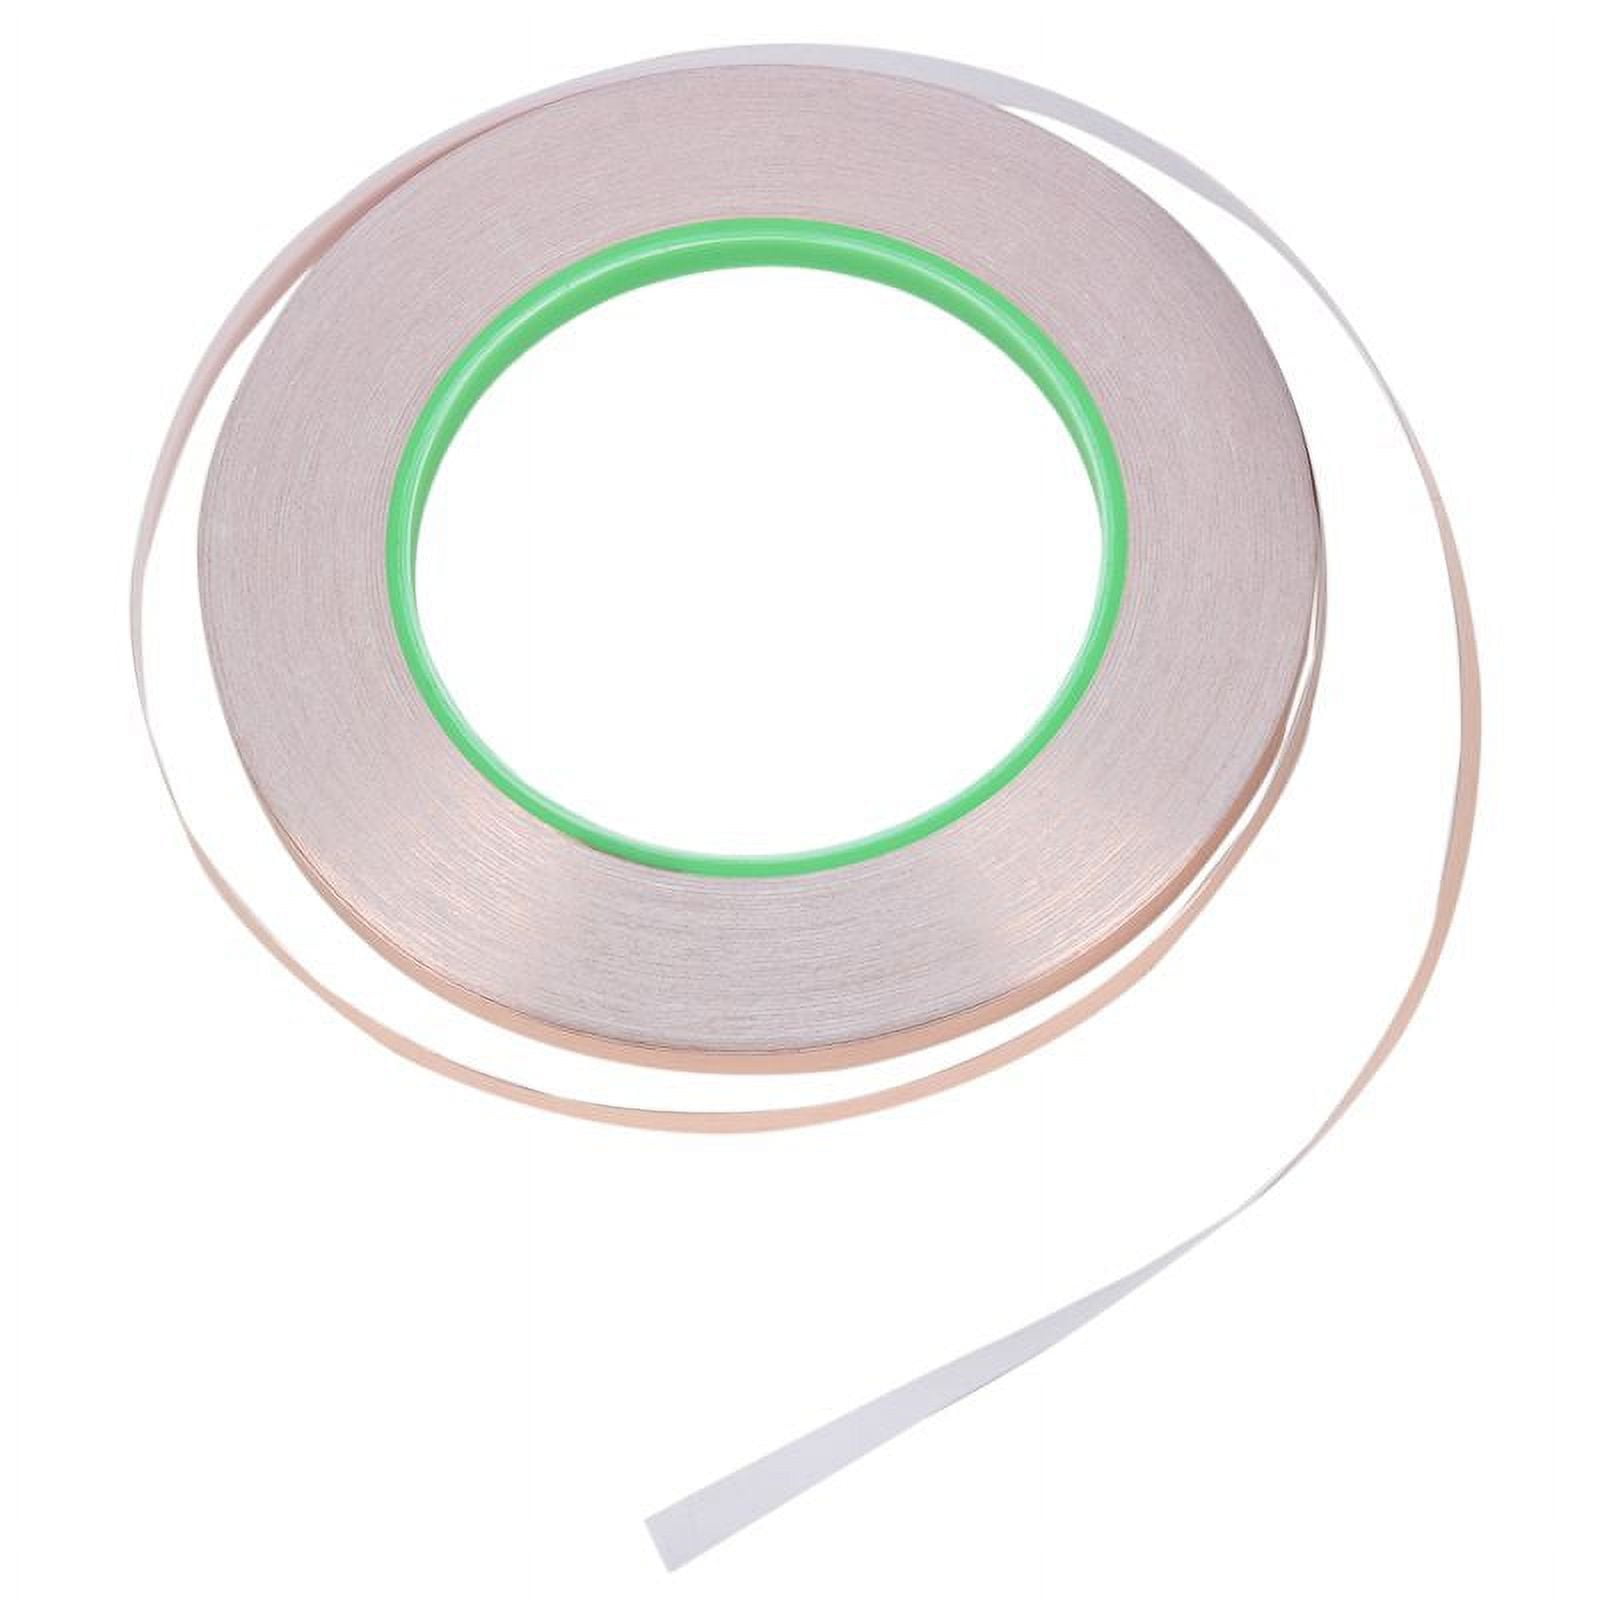 Copper Foil Tape with Adhesive (6mm X 33meters) – Crafts, Stained Glass,  Soldering, Electrical Repairs, Grounding, EMI Shielding 